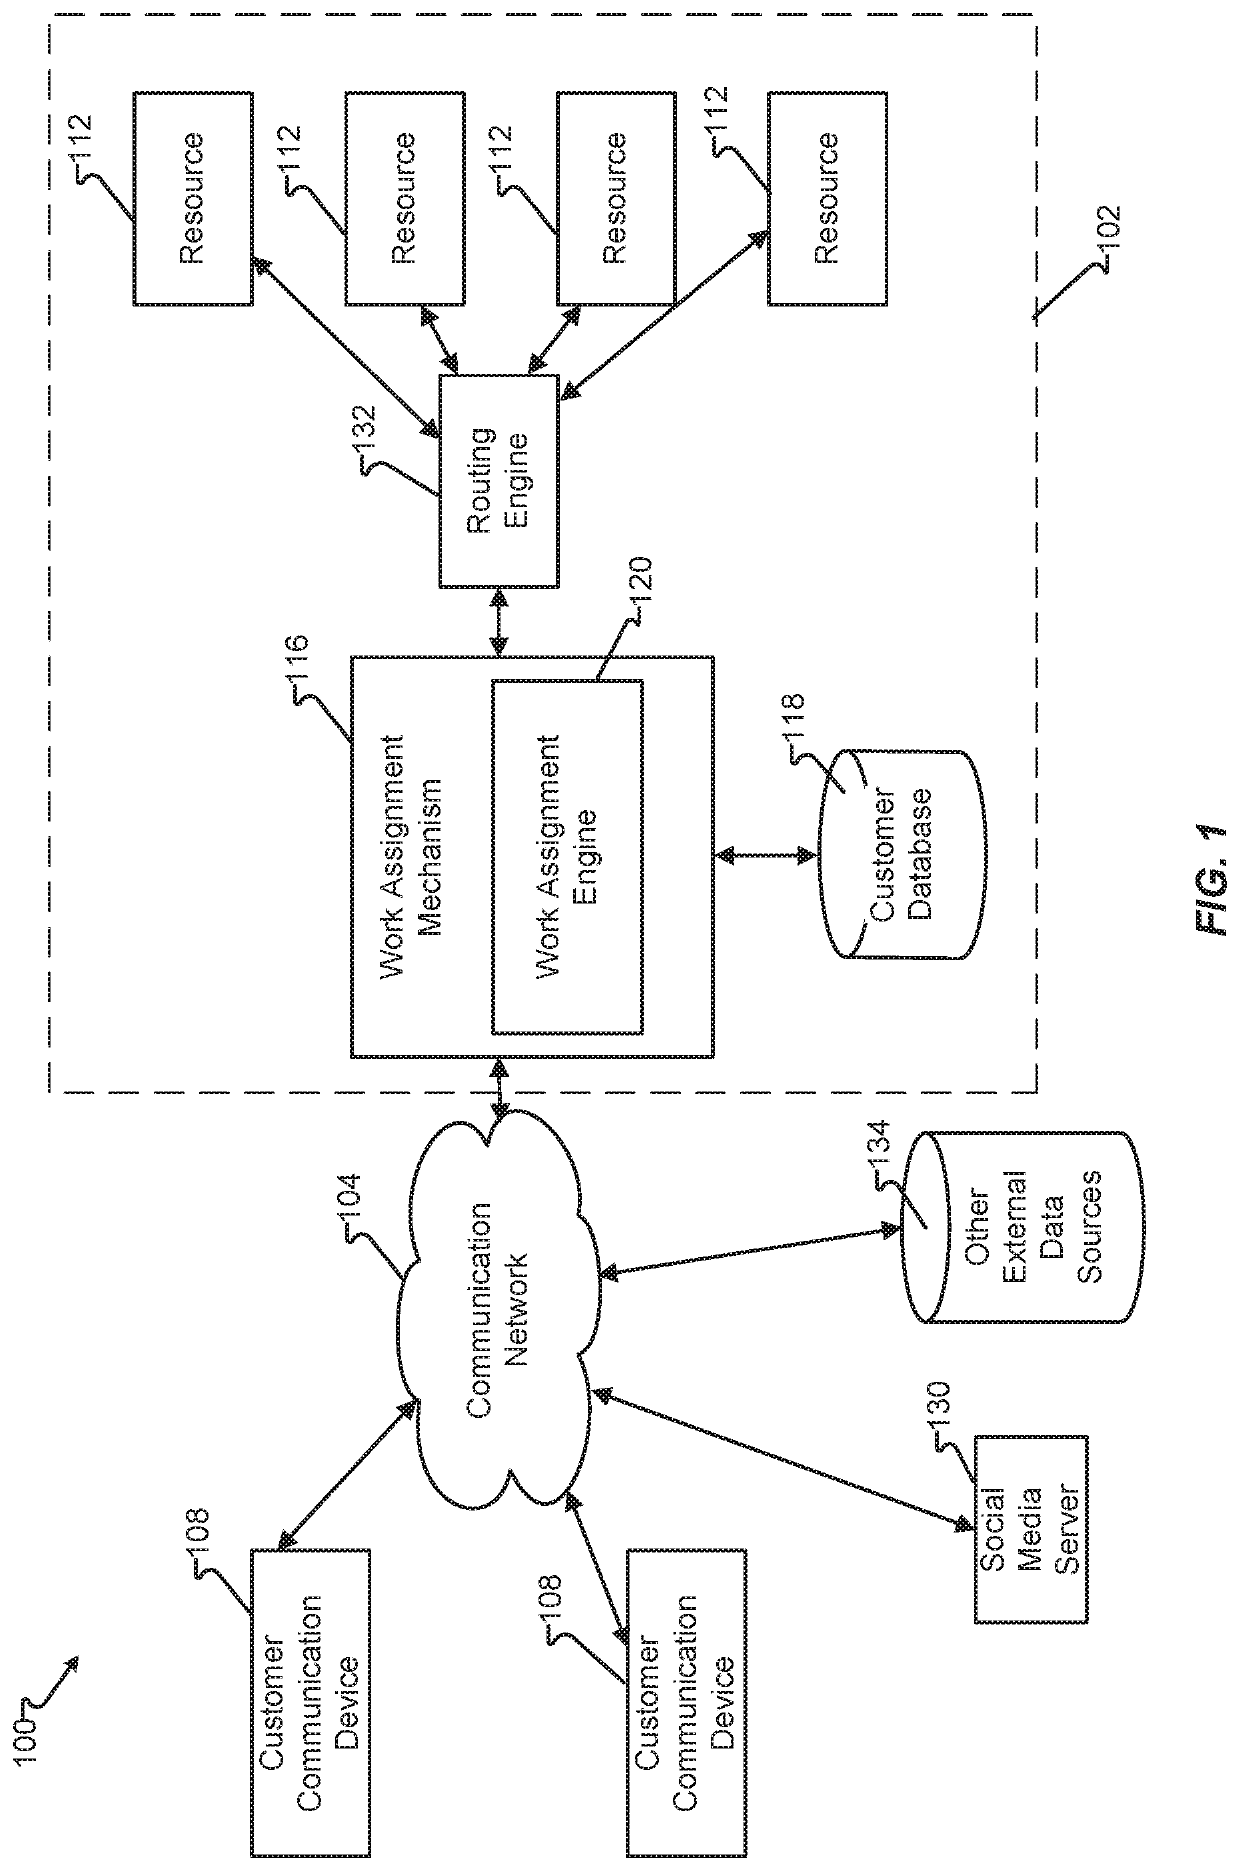 Systems and methods for adaptive emotion based automated emails and/or chat replies